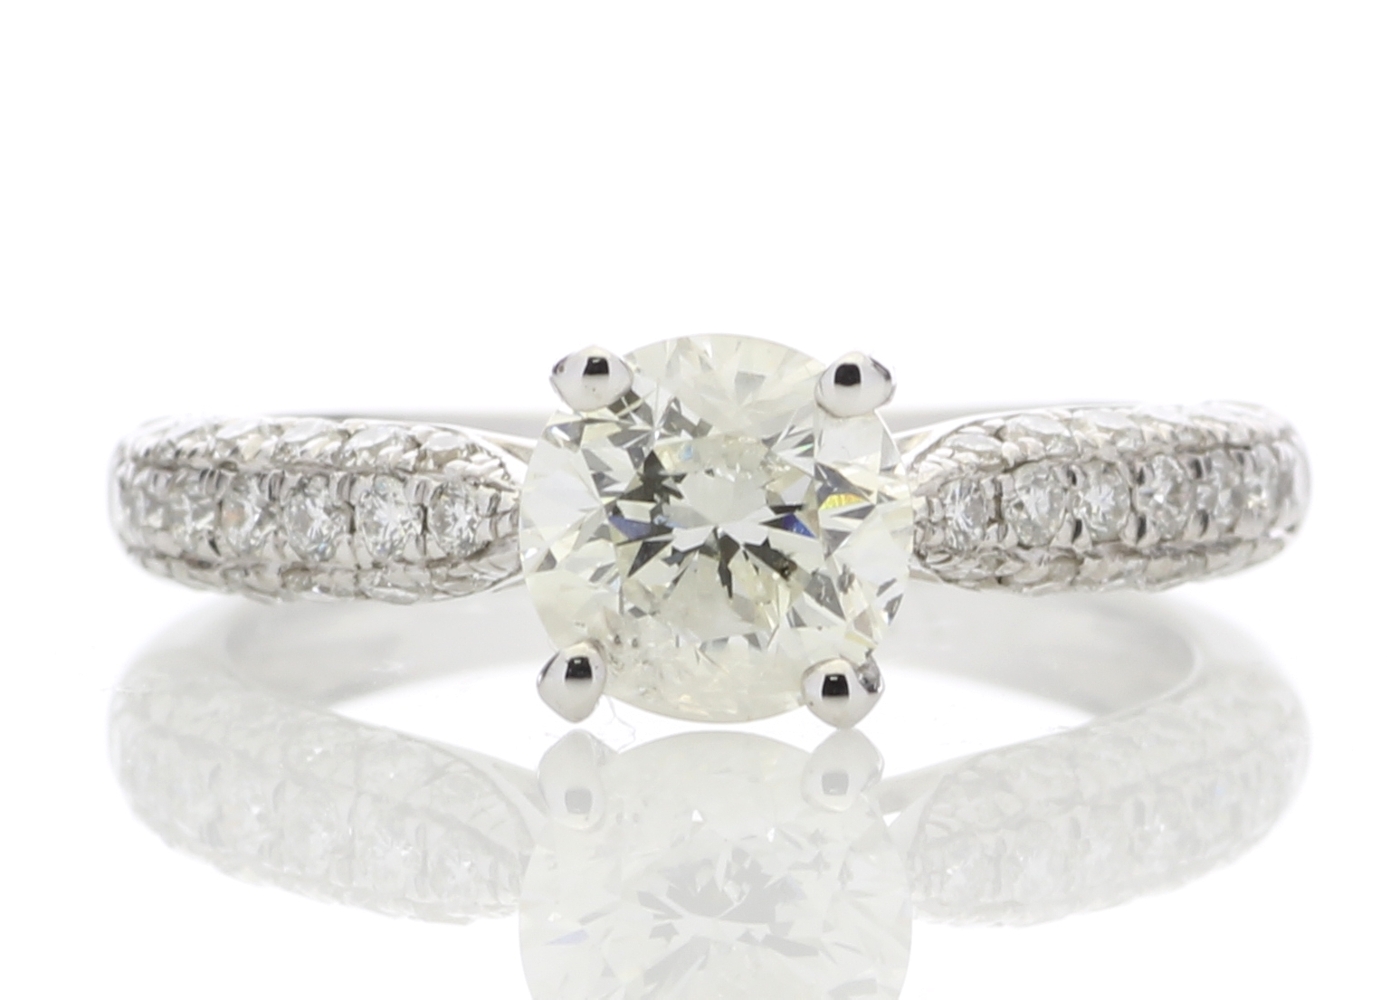 18ct White Gold Diamond Ring With Stone Set Shoulders 1.38 Carats - Valued By IDI £23,780.00 - A